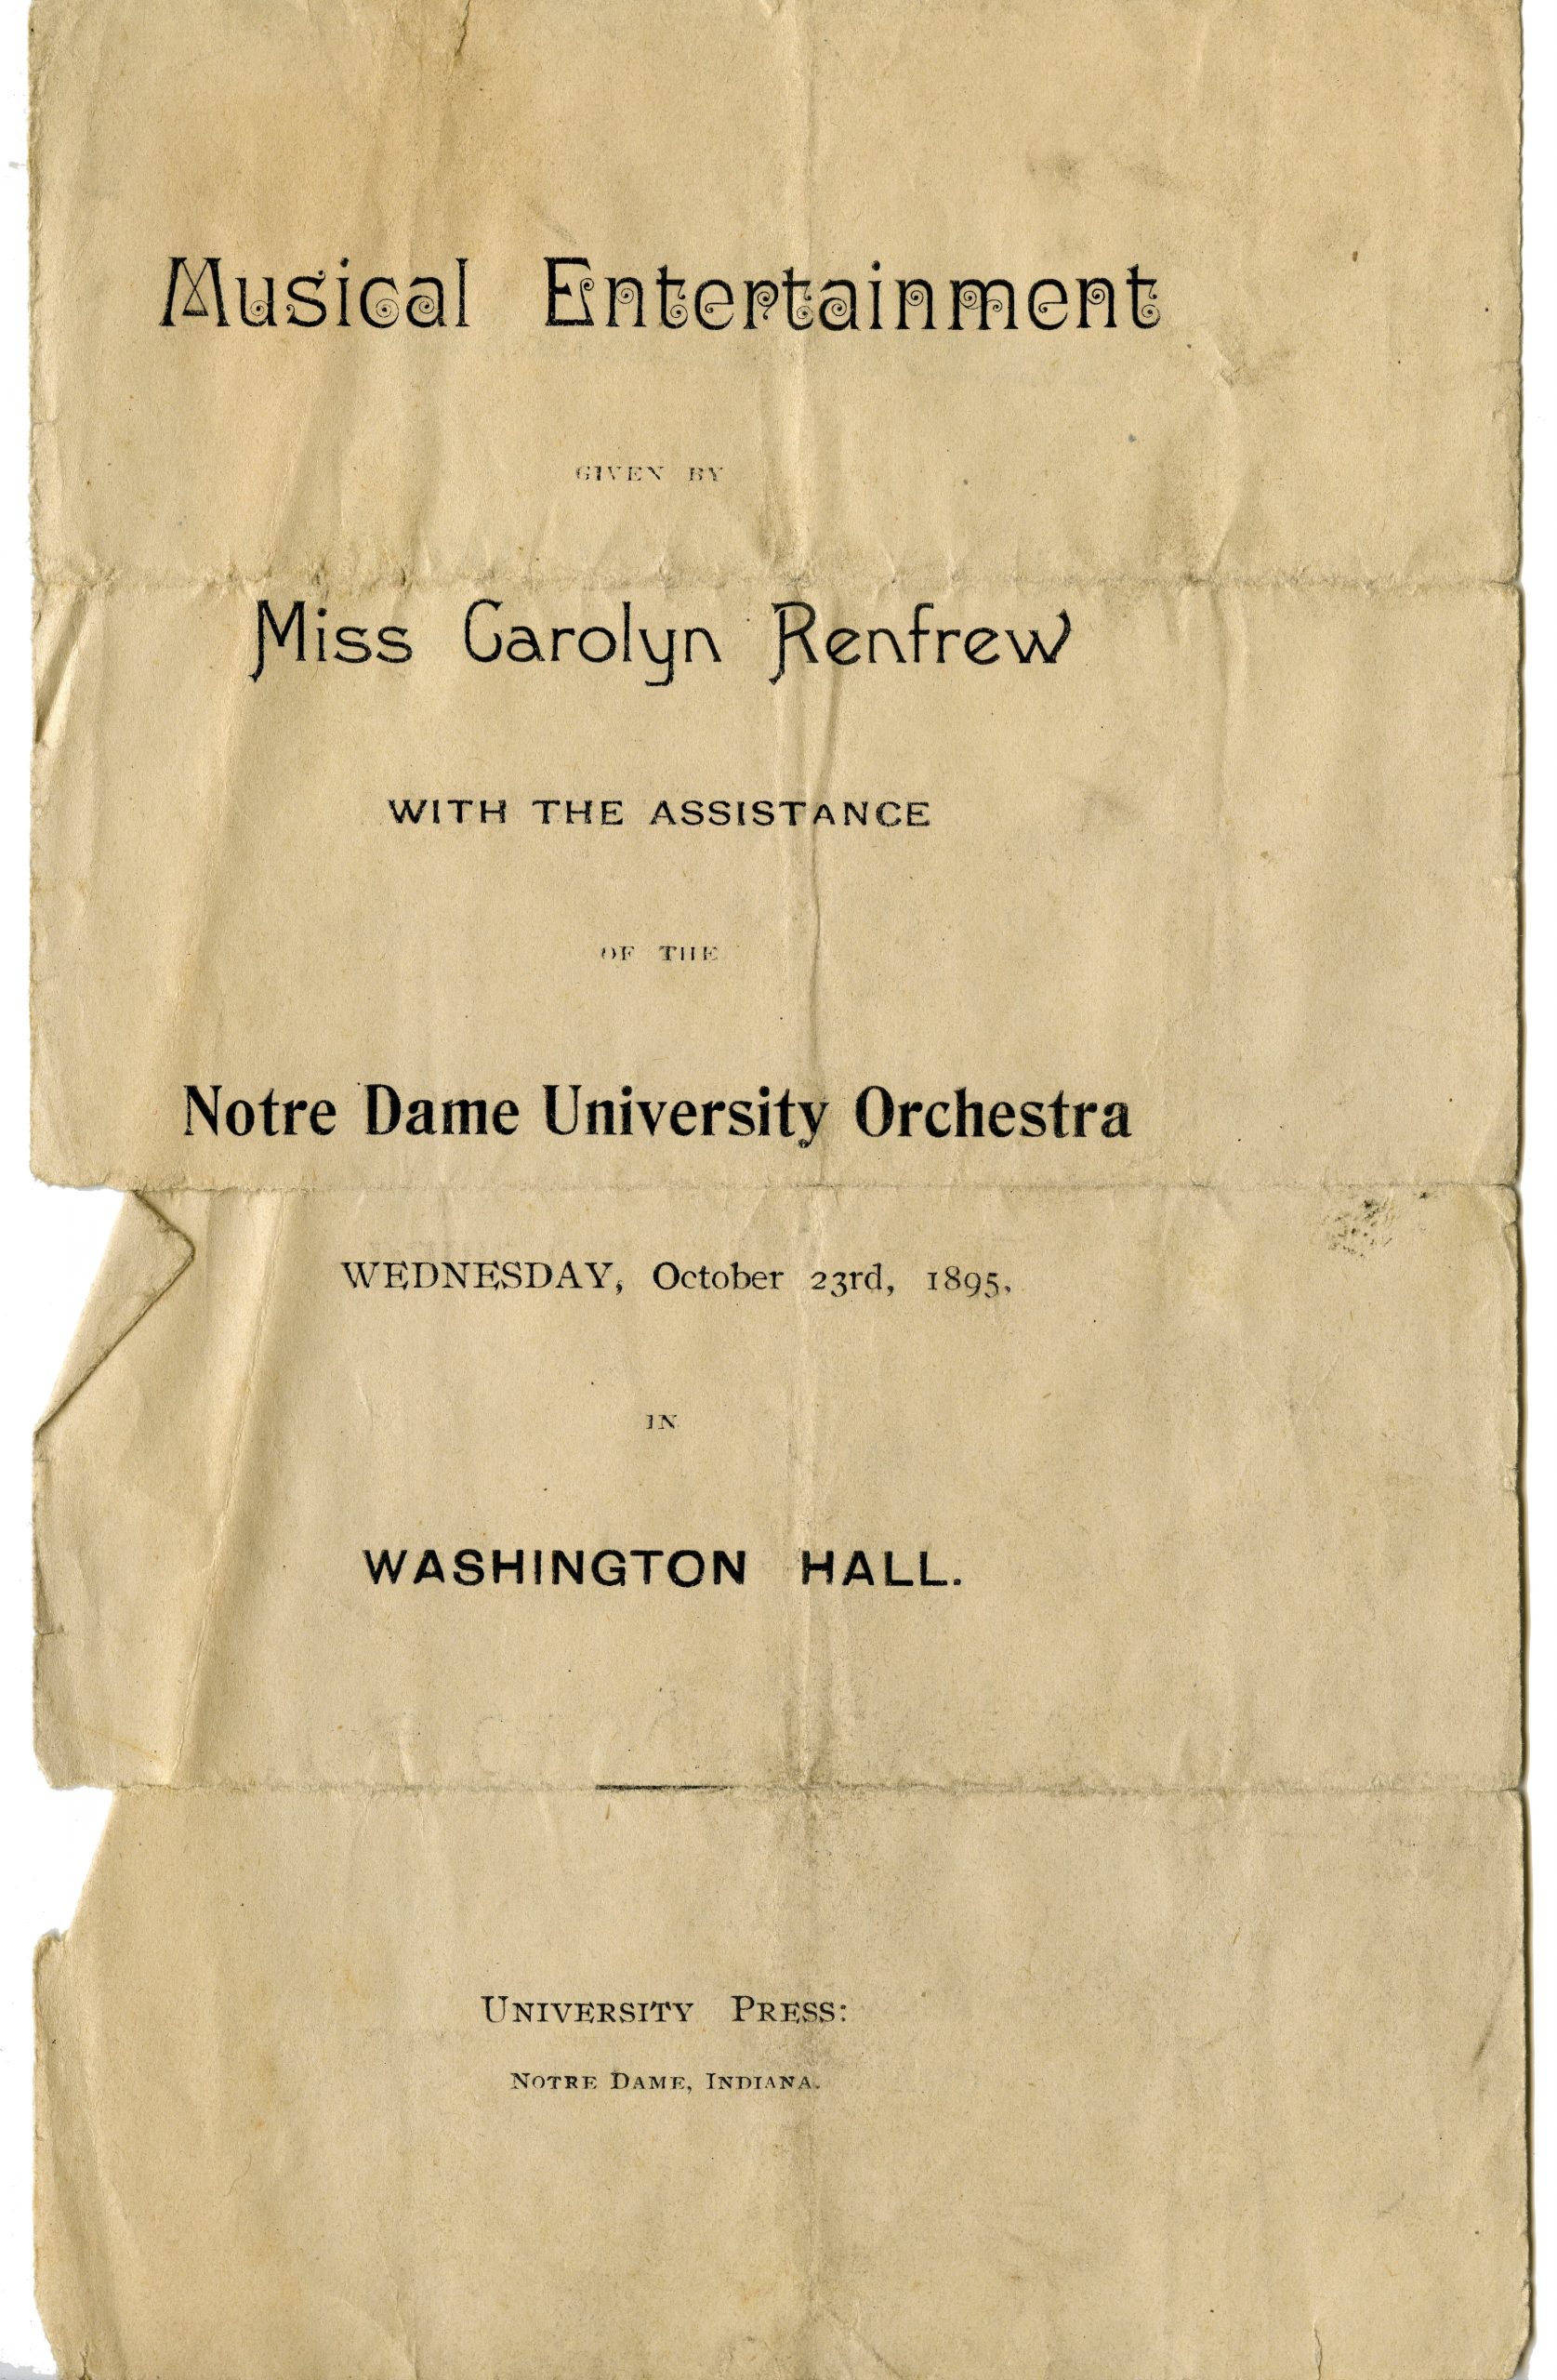 Music Program reads: Musical Entertainment GIVEN BY Miss Carolyn Renfrew WITH THE ASSISTANCE OF THE Notre Dame University Orchestra WEDNESDAY, October 23rd, 1895 IN WASHINGTON HALL. UNIVERSITY PRESS: NOTRE DAME, INDIANA